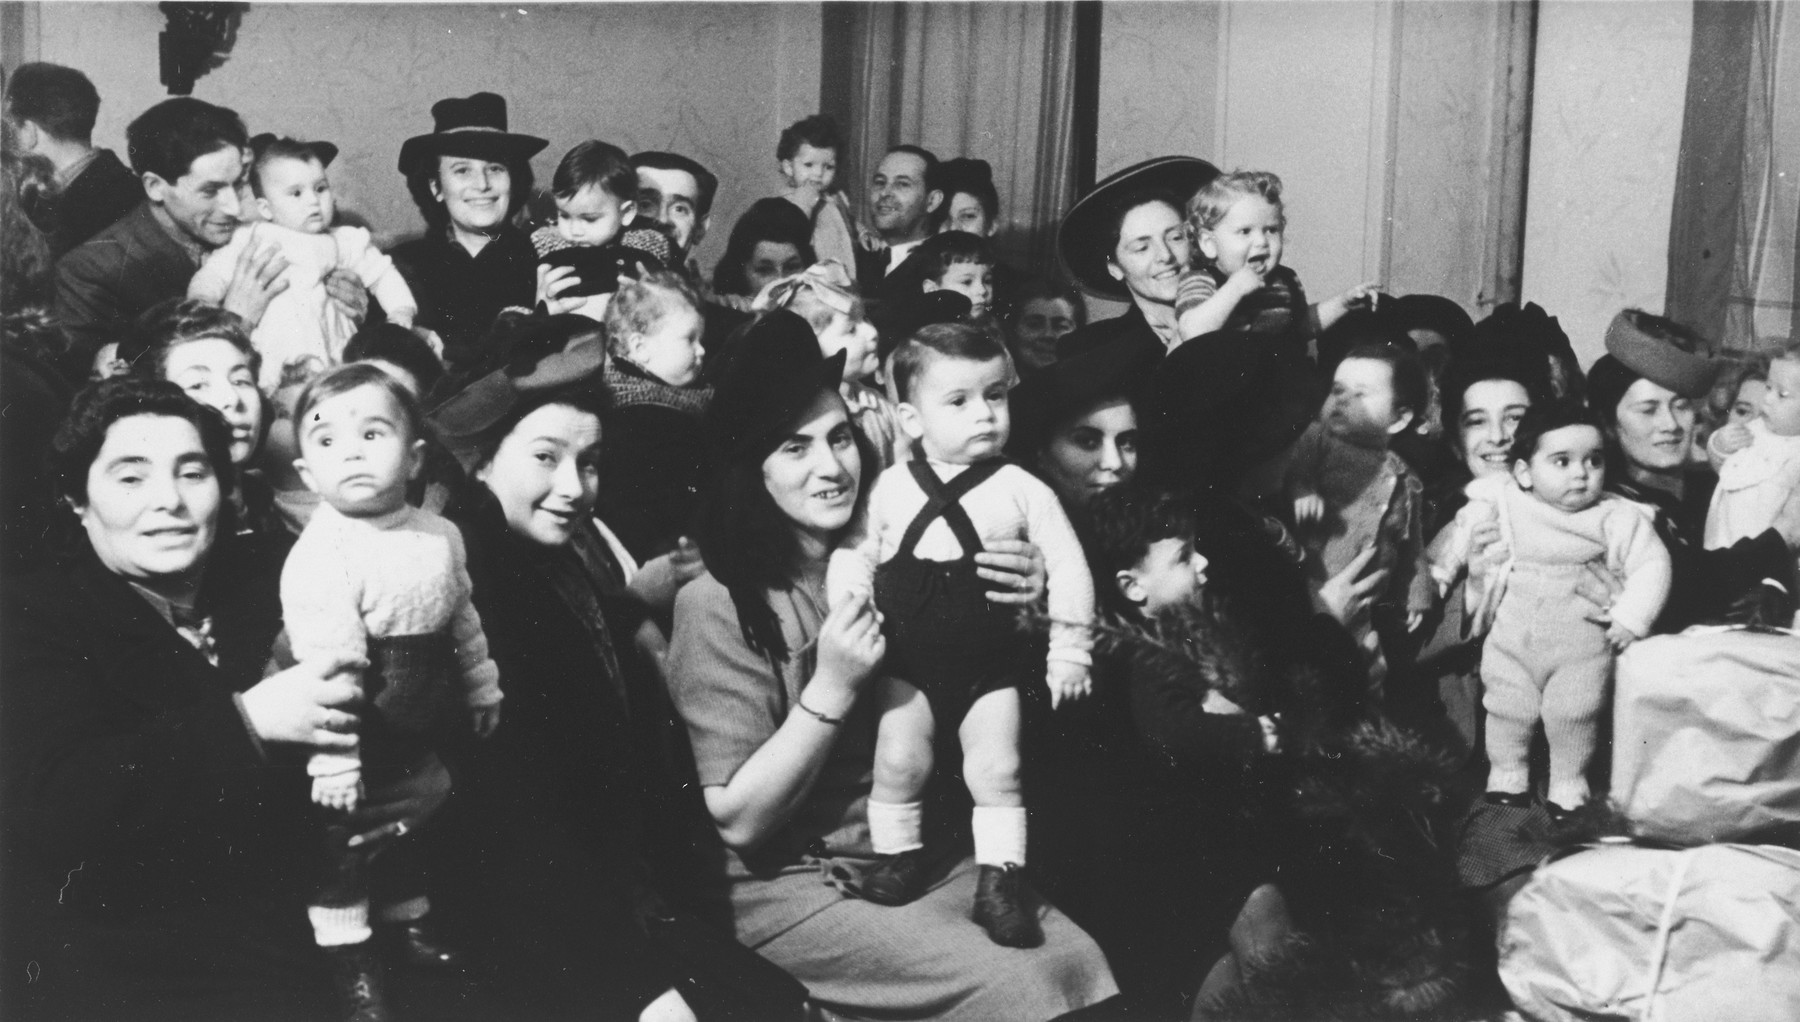 Women and children celebrate Tu B'Shvat in the Hanover DP community.

Among those pictured is Mrs. Roman Berger.  In the back center is Shimon Bornstein holding his son David. Pictured in the back of the room, center right, are Leona (Lonia) Finkler and Arnold (Abram) Finkler, holding their daugher Chava Pninah (Patricia) Finkler Friedland.